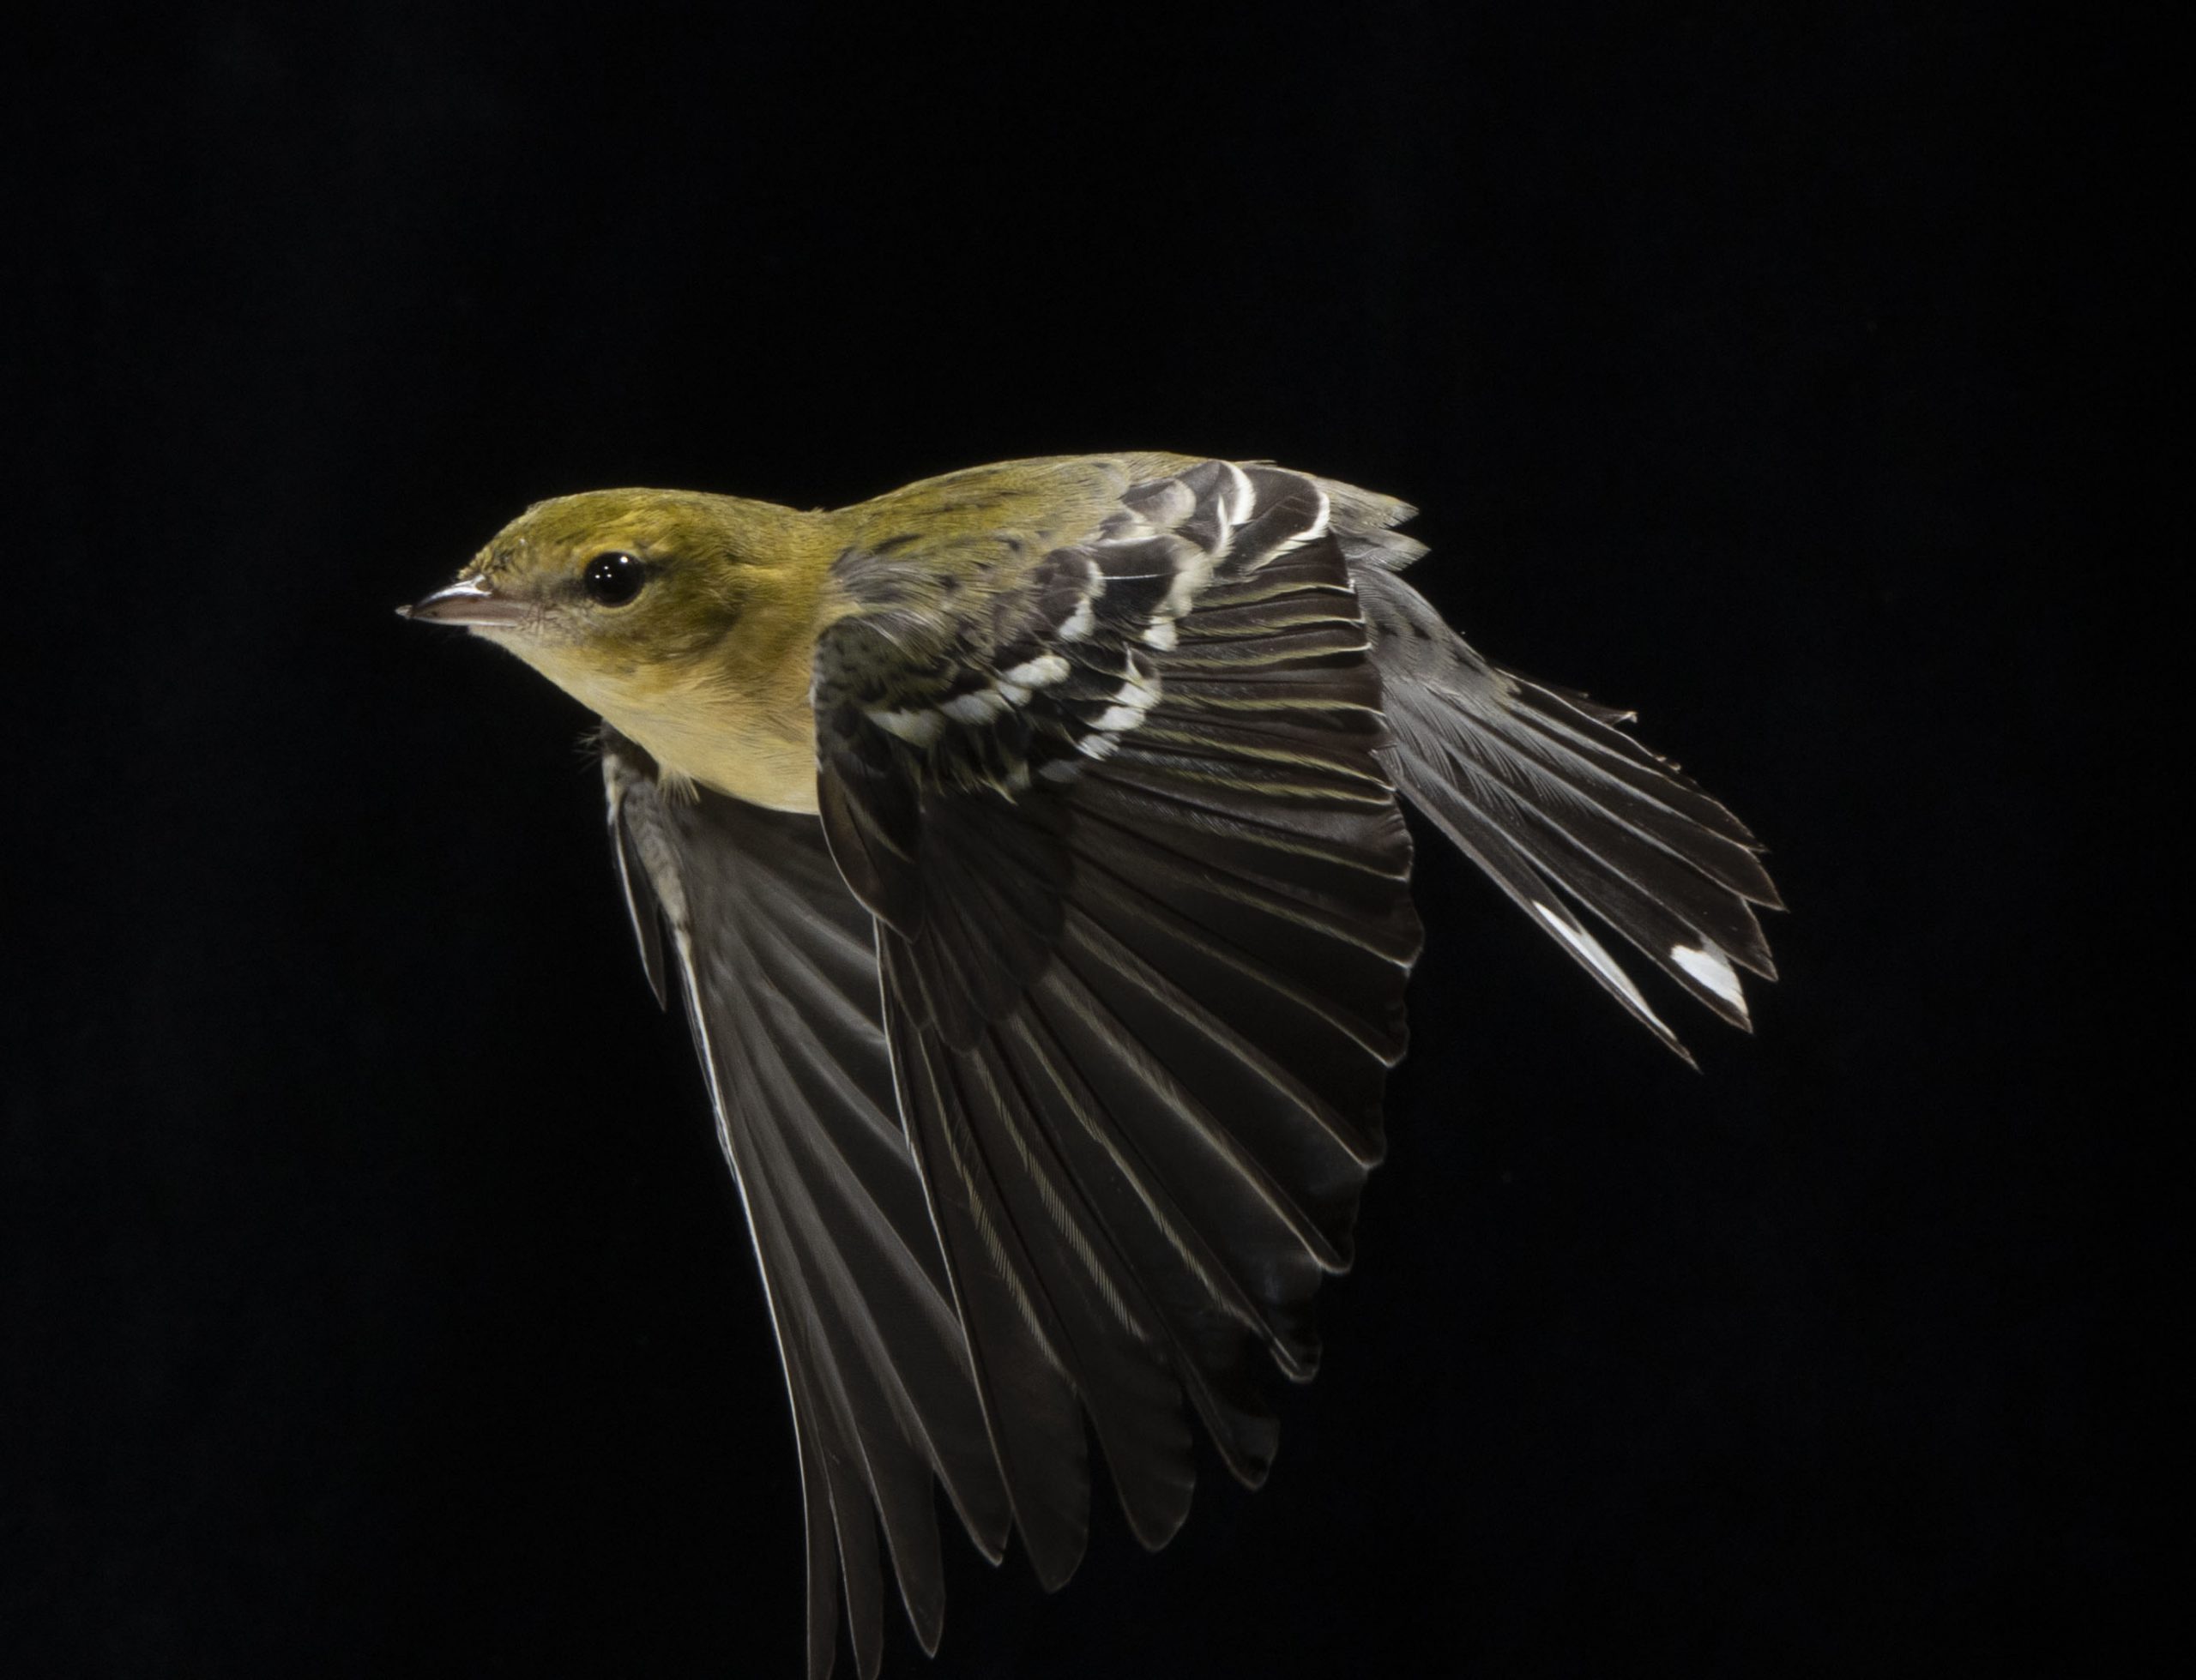 Bay-breasted Warbler in flight with a black background